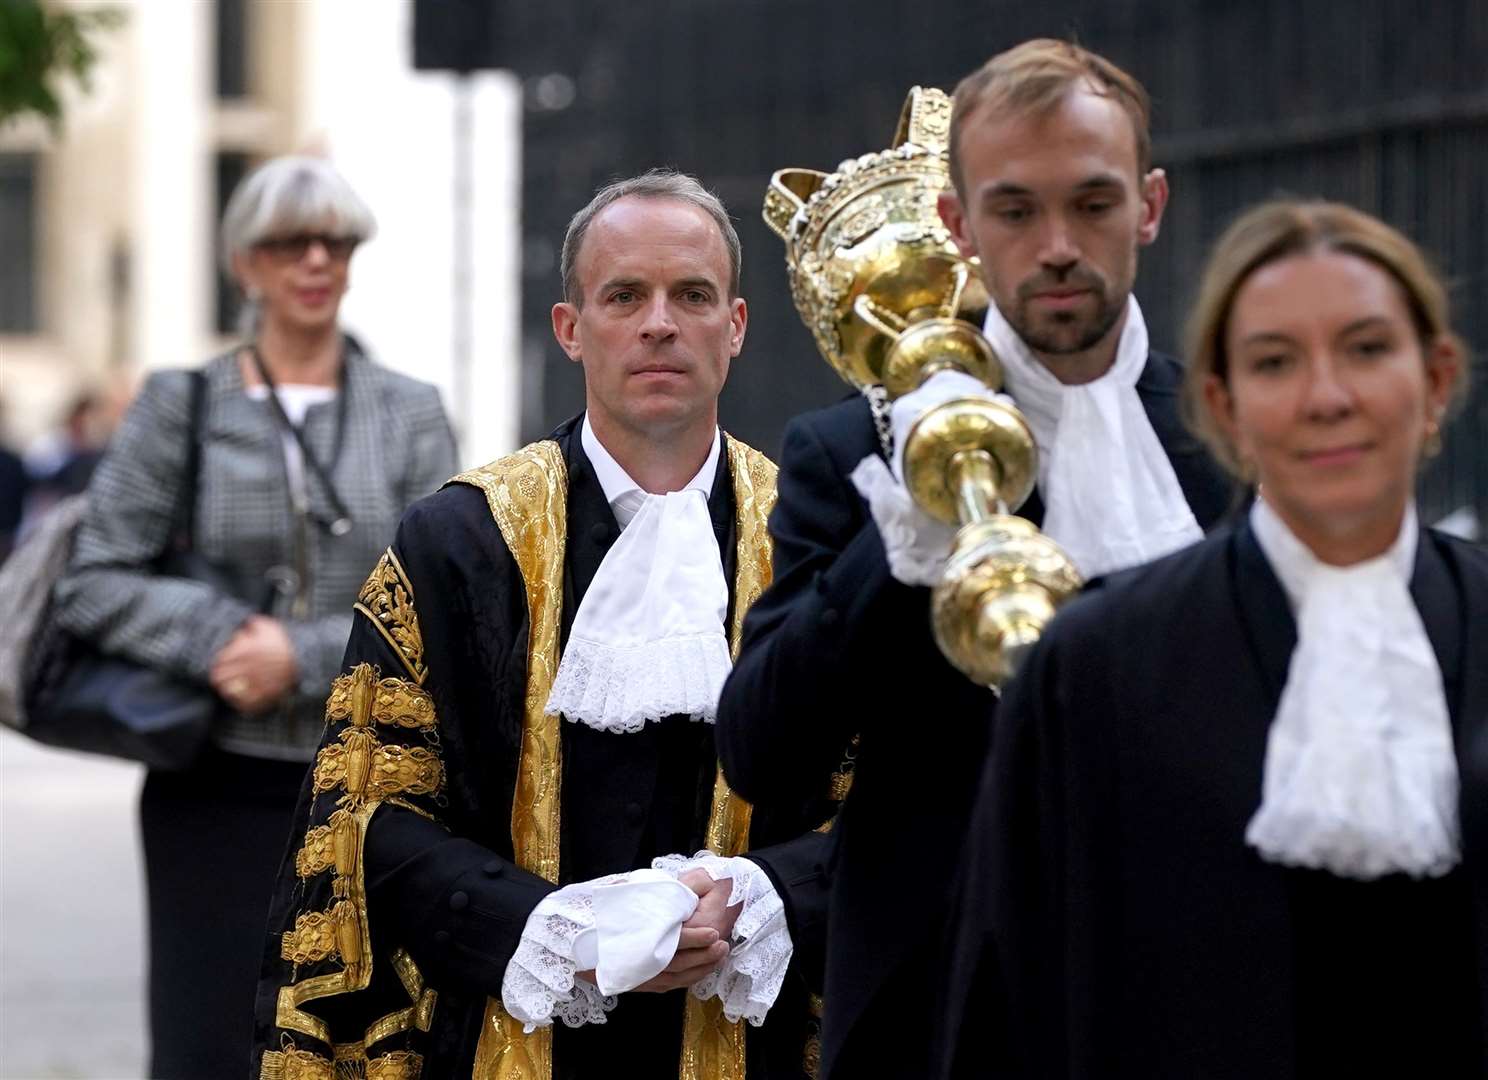 The new Lord Chancellor Dominic Raab arrives at the Judges’ entrance (Gareth Fuller/PA)